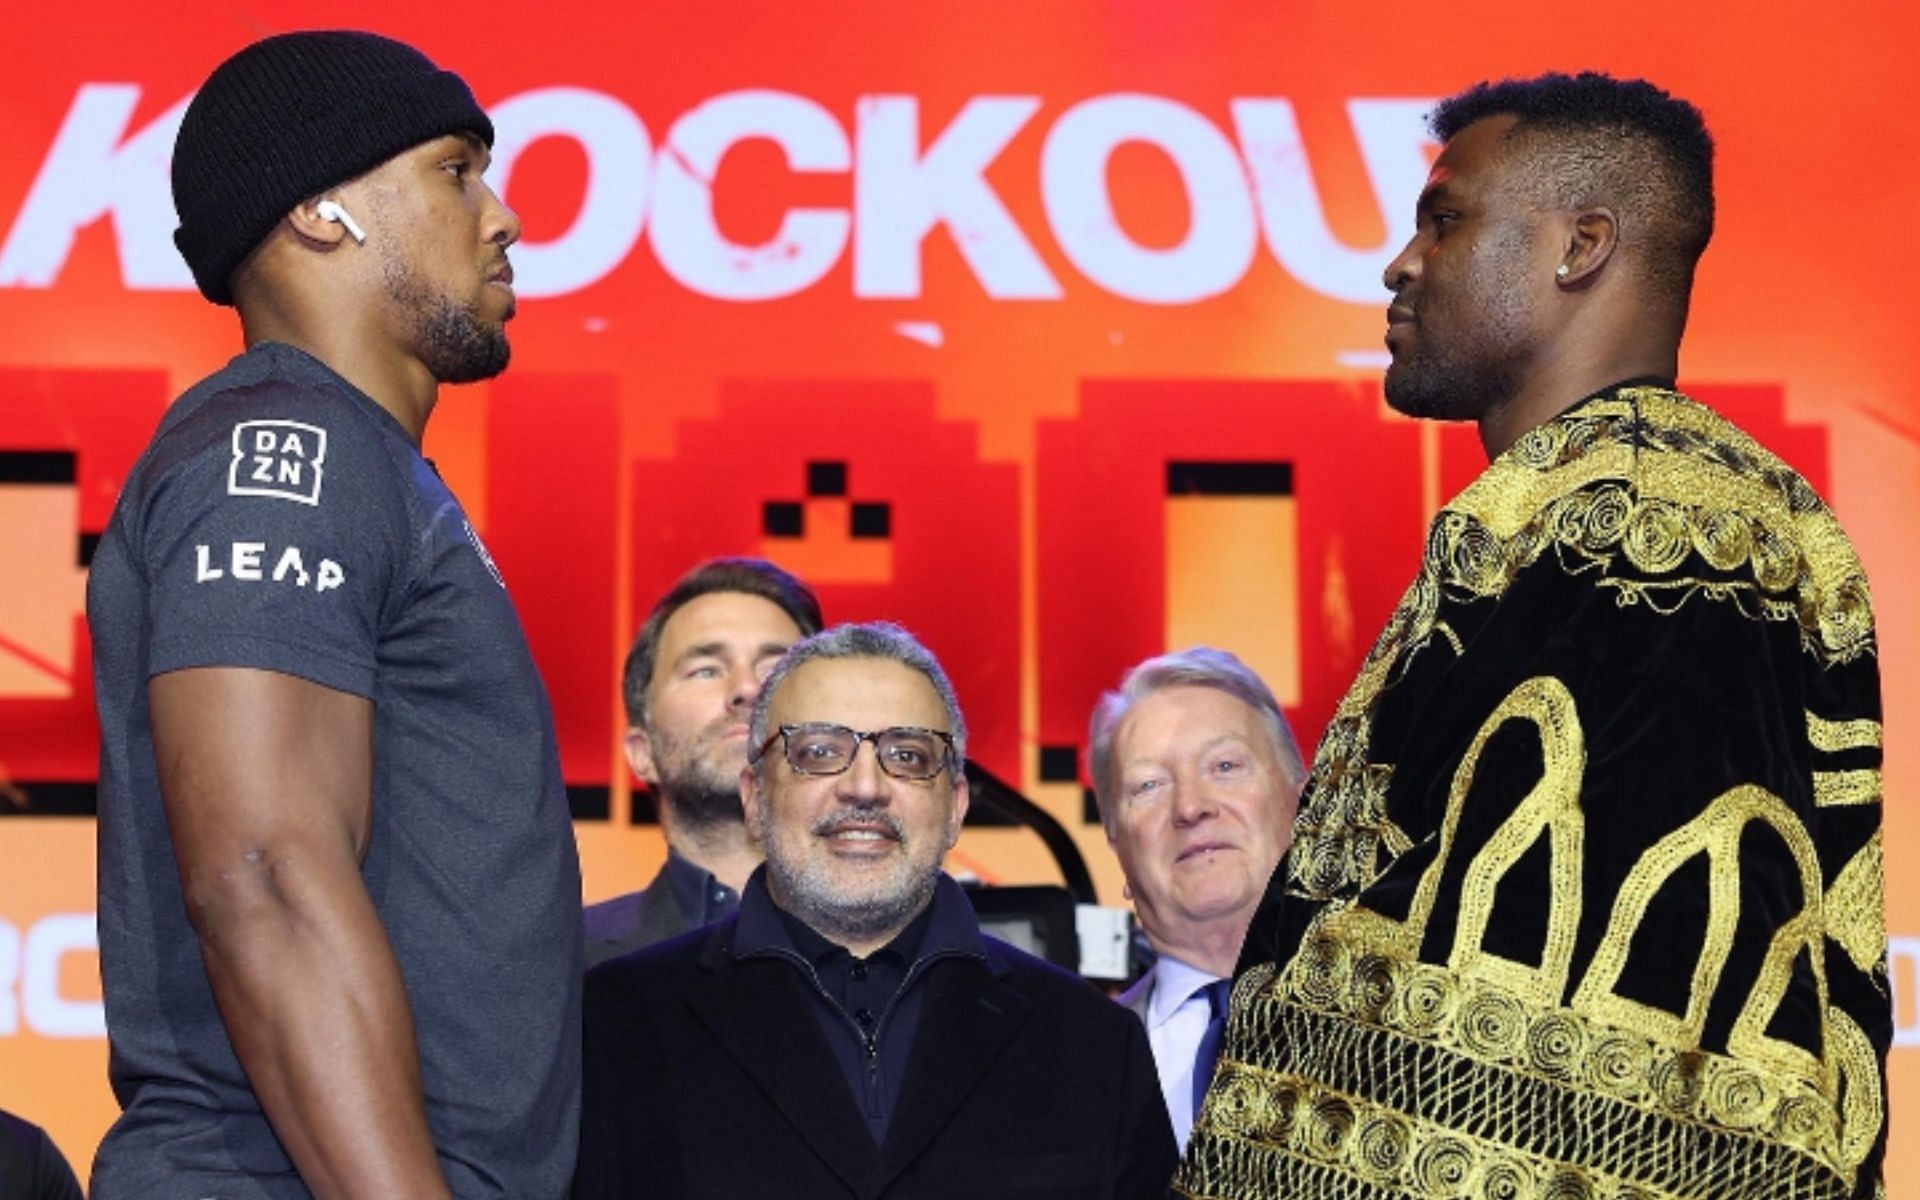 Anthony Joshua vs. Francis Ngannou is set for March 8. [Image via @MatchroomBoxing on Instagram]